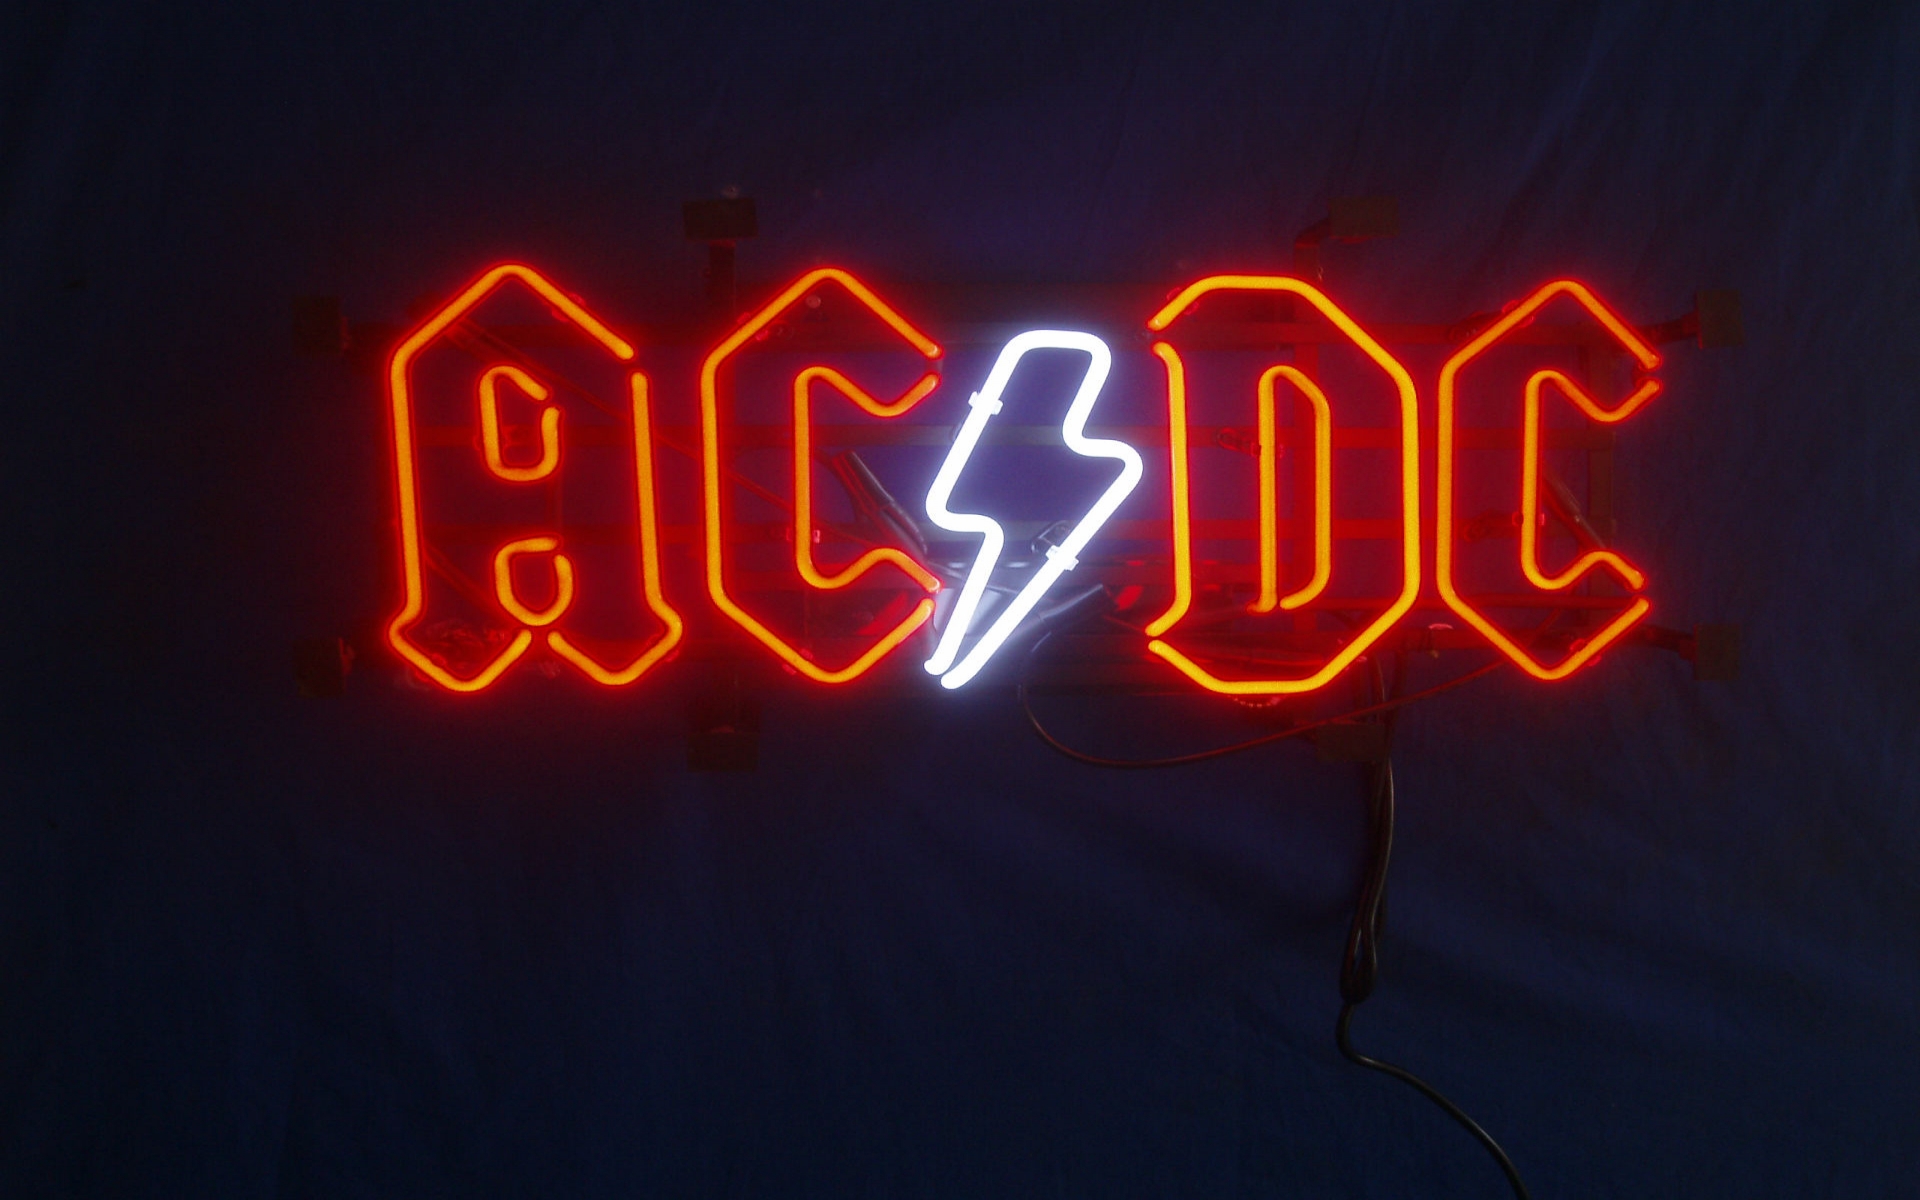 ac dc, Ac, Dc, Acdc, Heavy, Metal, Hard, Rock, Classic, Bands, Groups